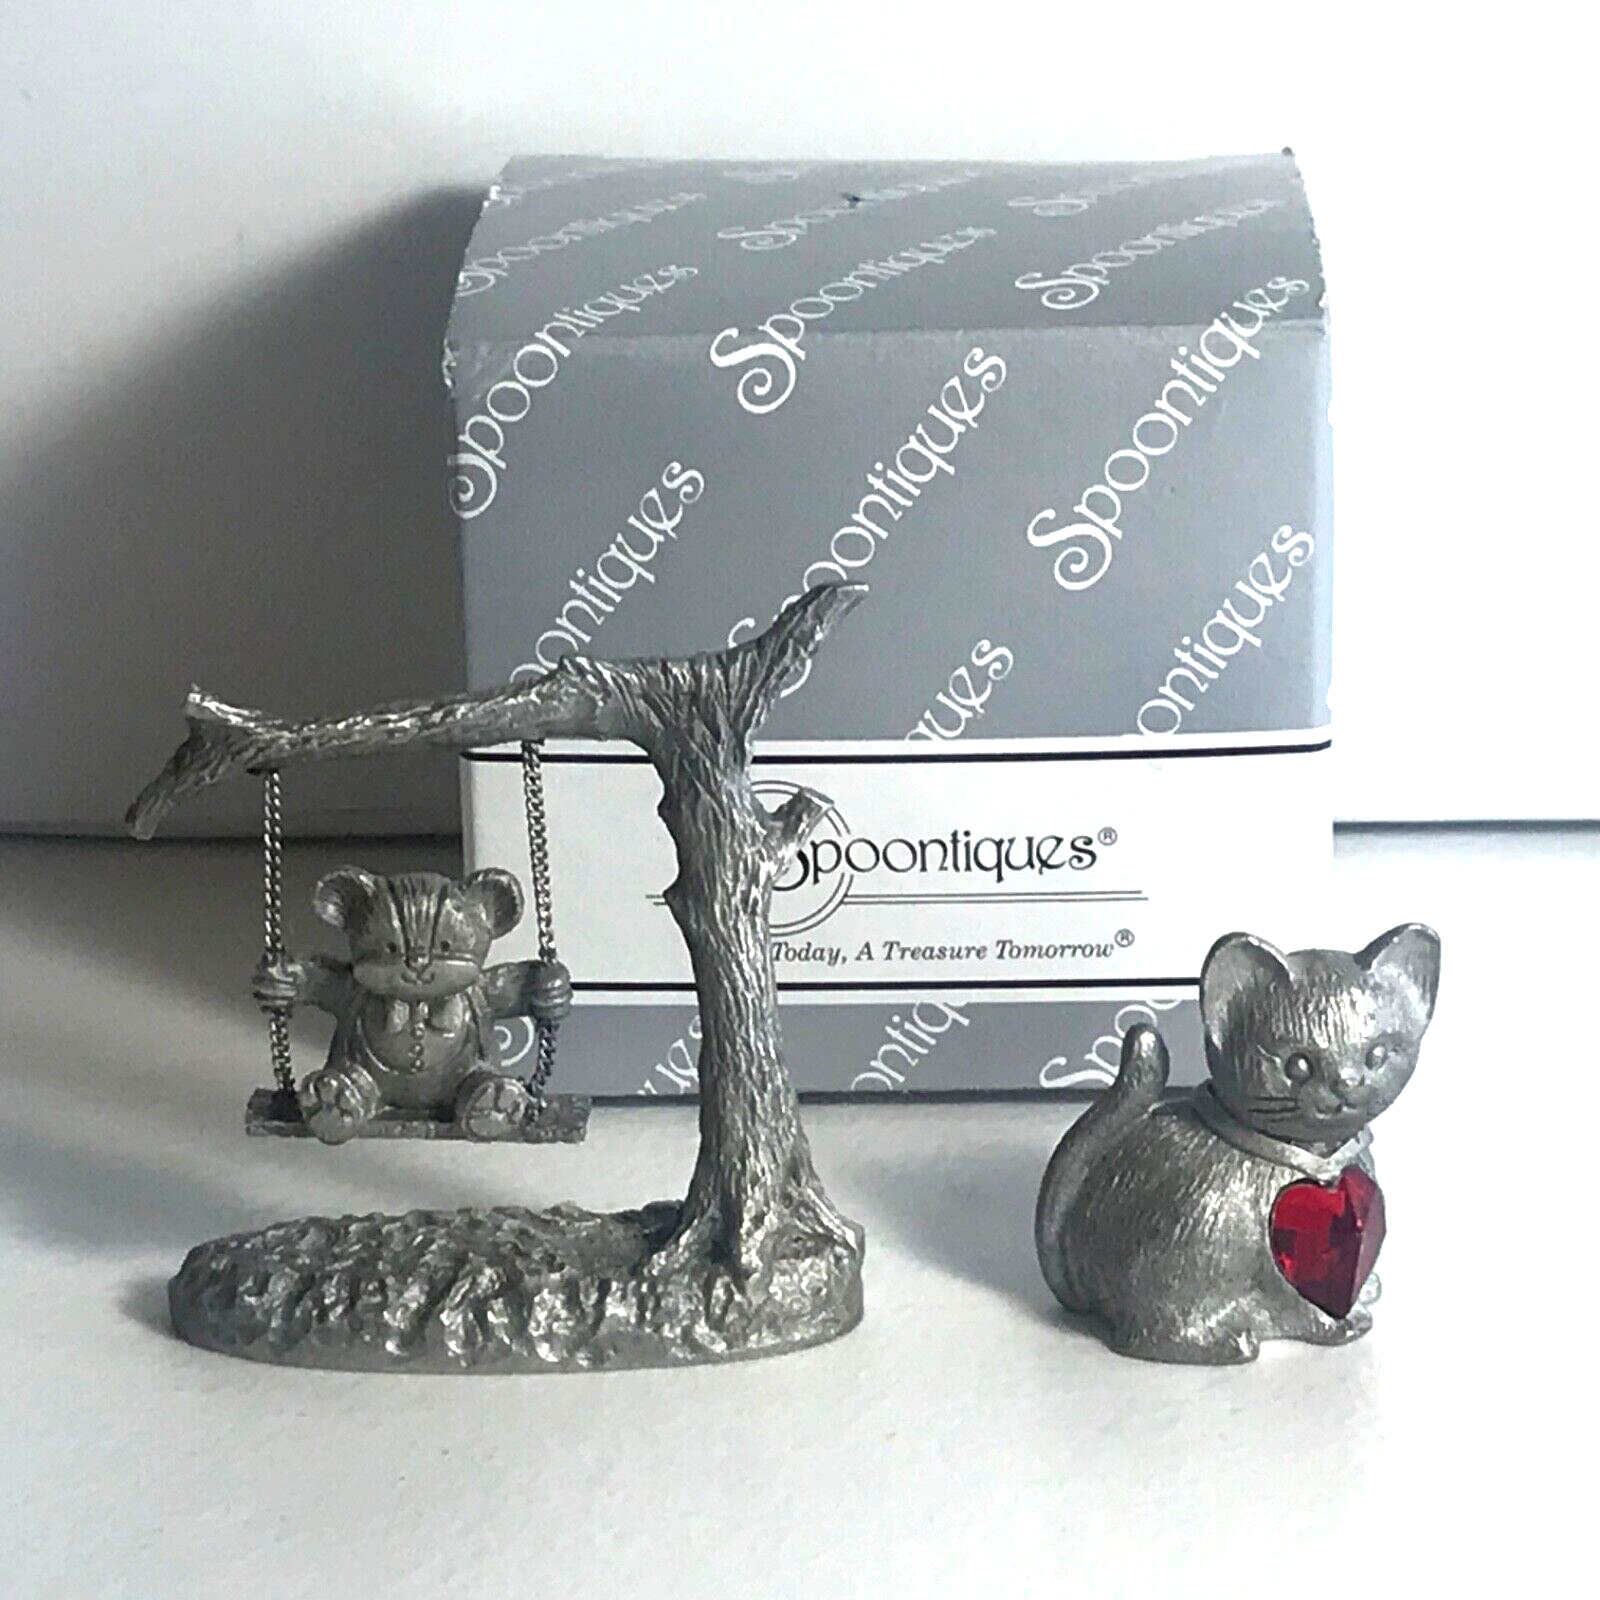 Spoontiques 396 Pewter Miniature Swinging Bear New In Box & Cat With Red Gem